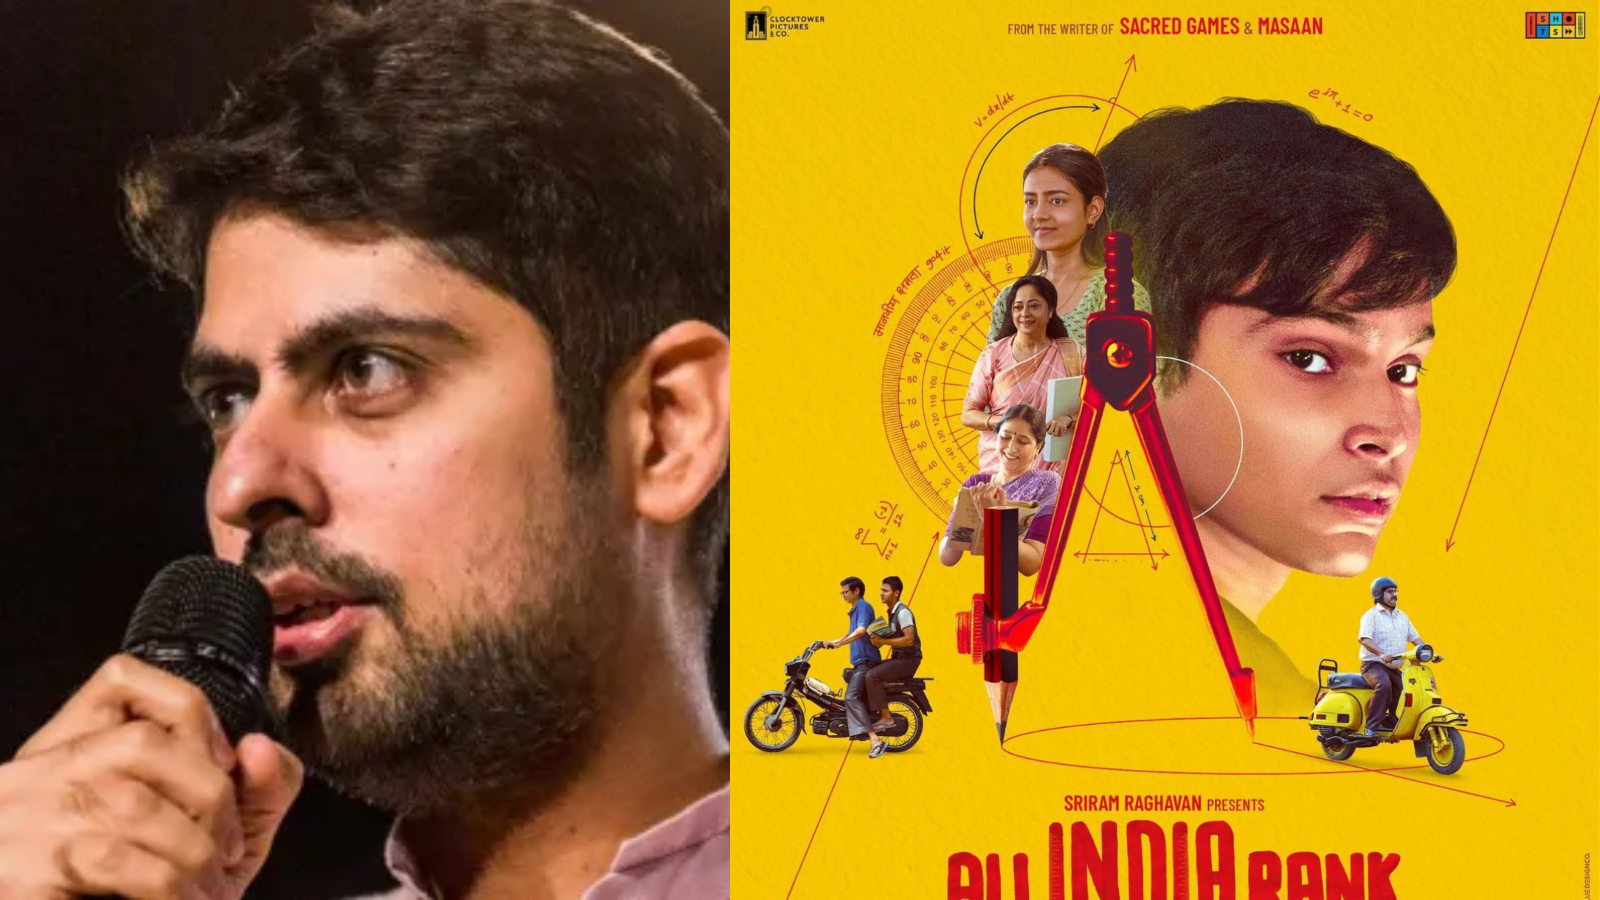 android, varun grover says people ‘would be flocking to the theaters’ if all india rank was titled animal 2: ‘more people would come to watch it’